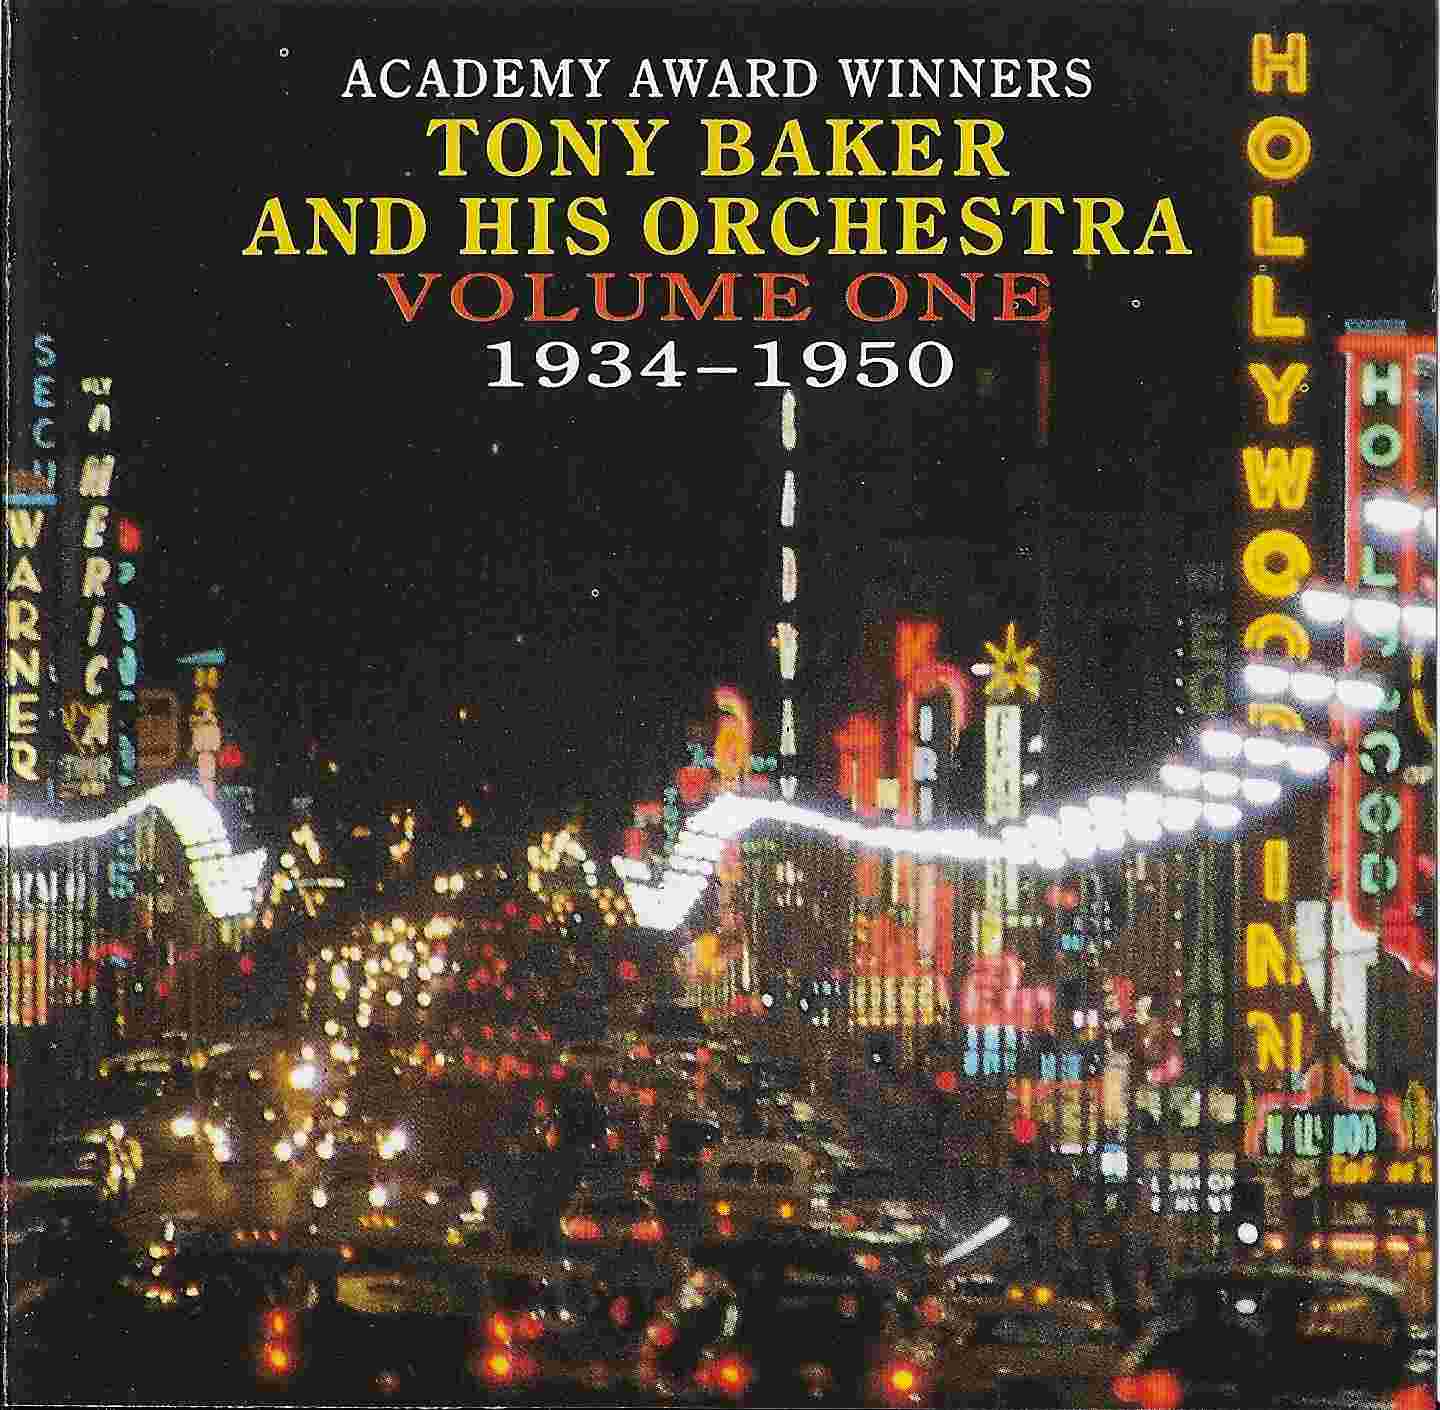 Picture of Academy award winners, volume one 1934 - 1950 by artist Tony Baker and his orchestra from the BBC cds - Records and Tapes library